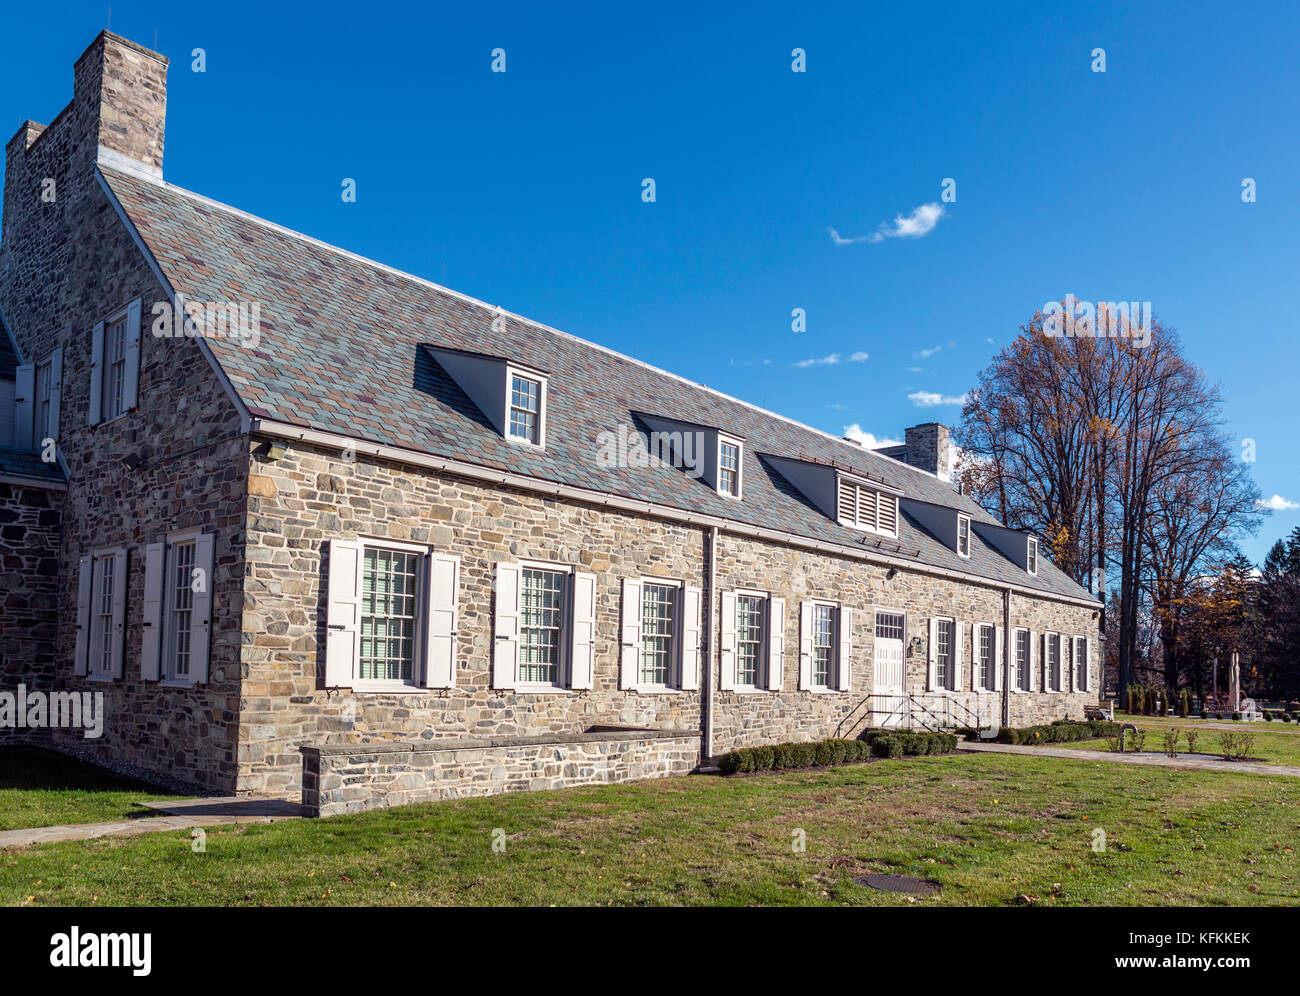 Franklin D Roosevelt Presidential Library and Museum, Franklin D. Roosevelt National Historic Site, Hyde Park, New York State, USA Stock Photo